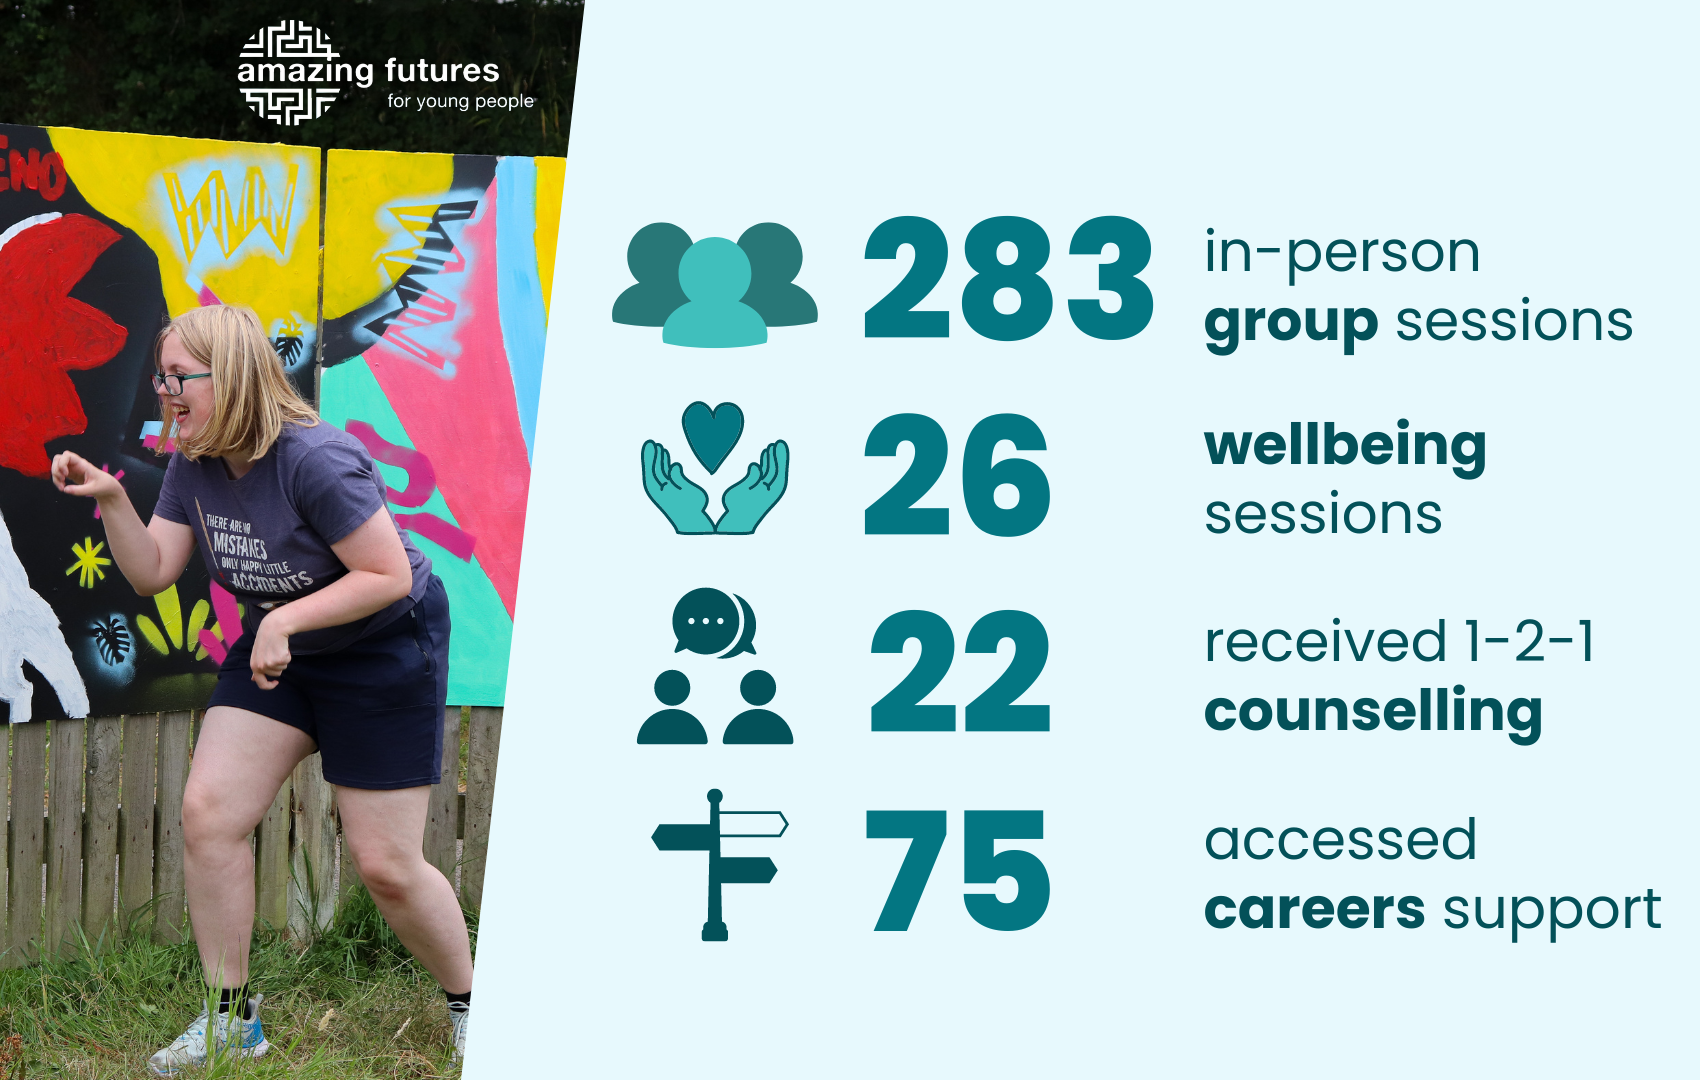 283 in-person group sessions. 26 wellbeing sessions. 22 received one-to-one counselling. 75 accessed careers support.